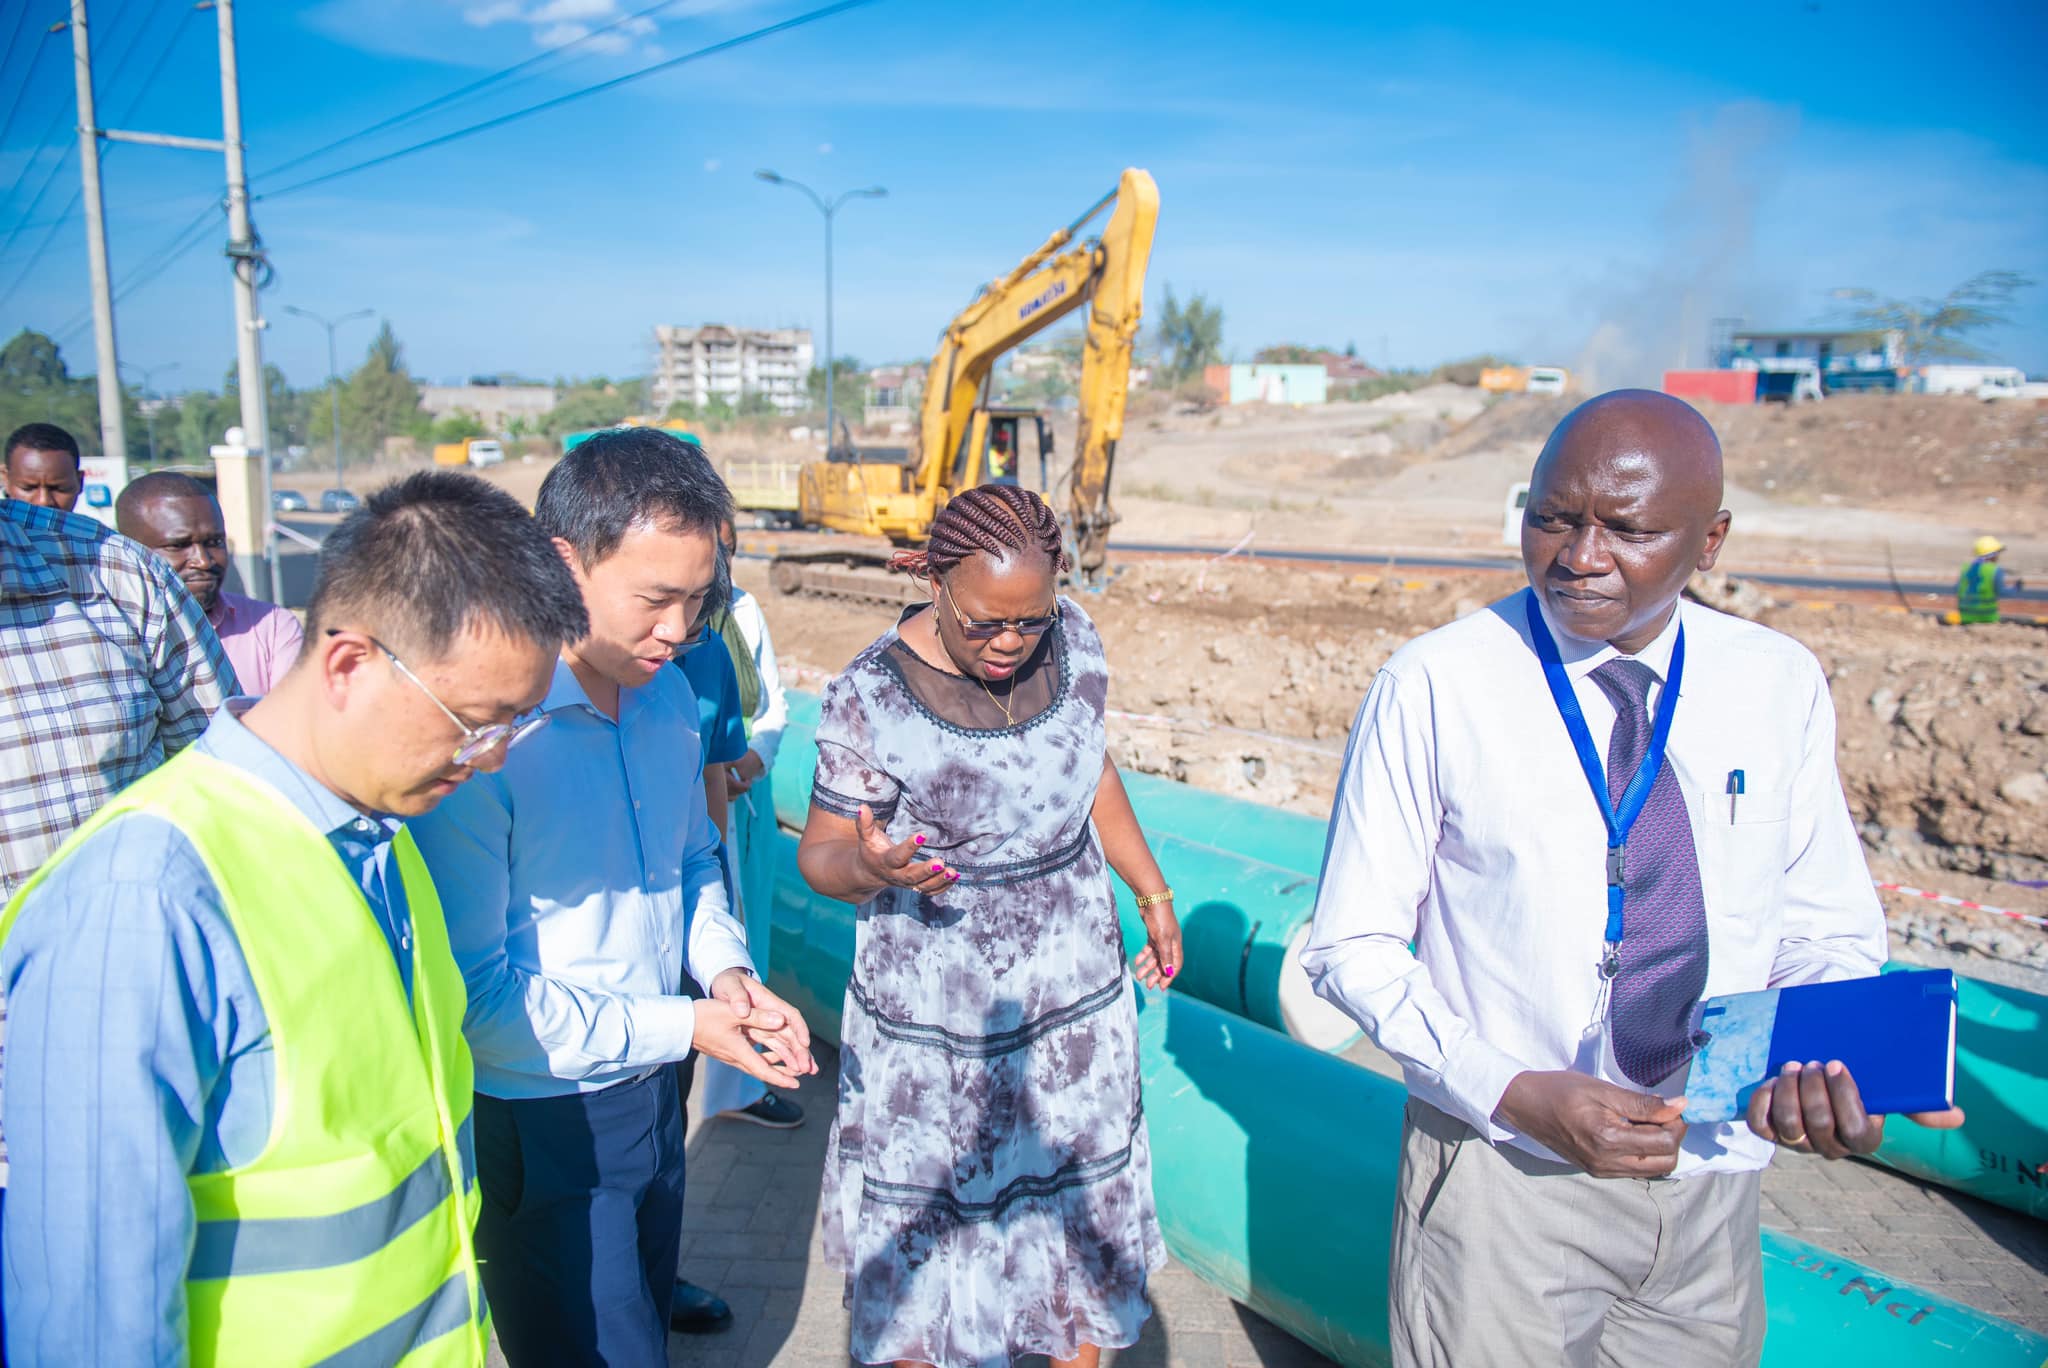 Multimillion Sewerage Network Intensification Project to Improve Water Sanitation in Nairobi